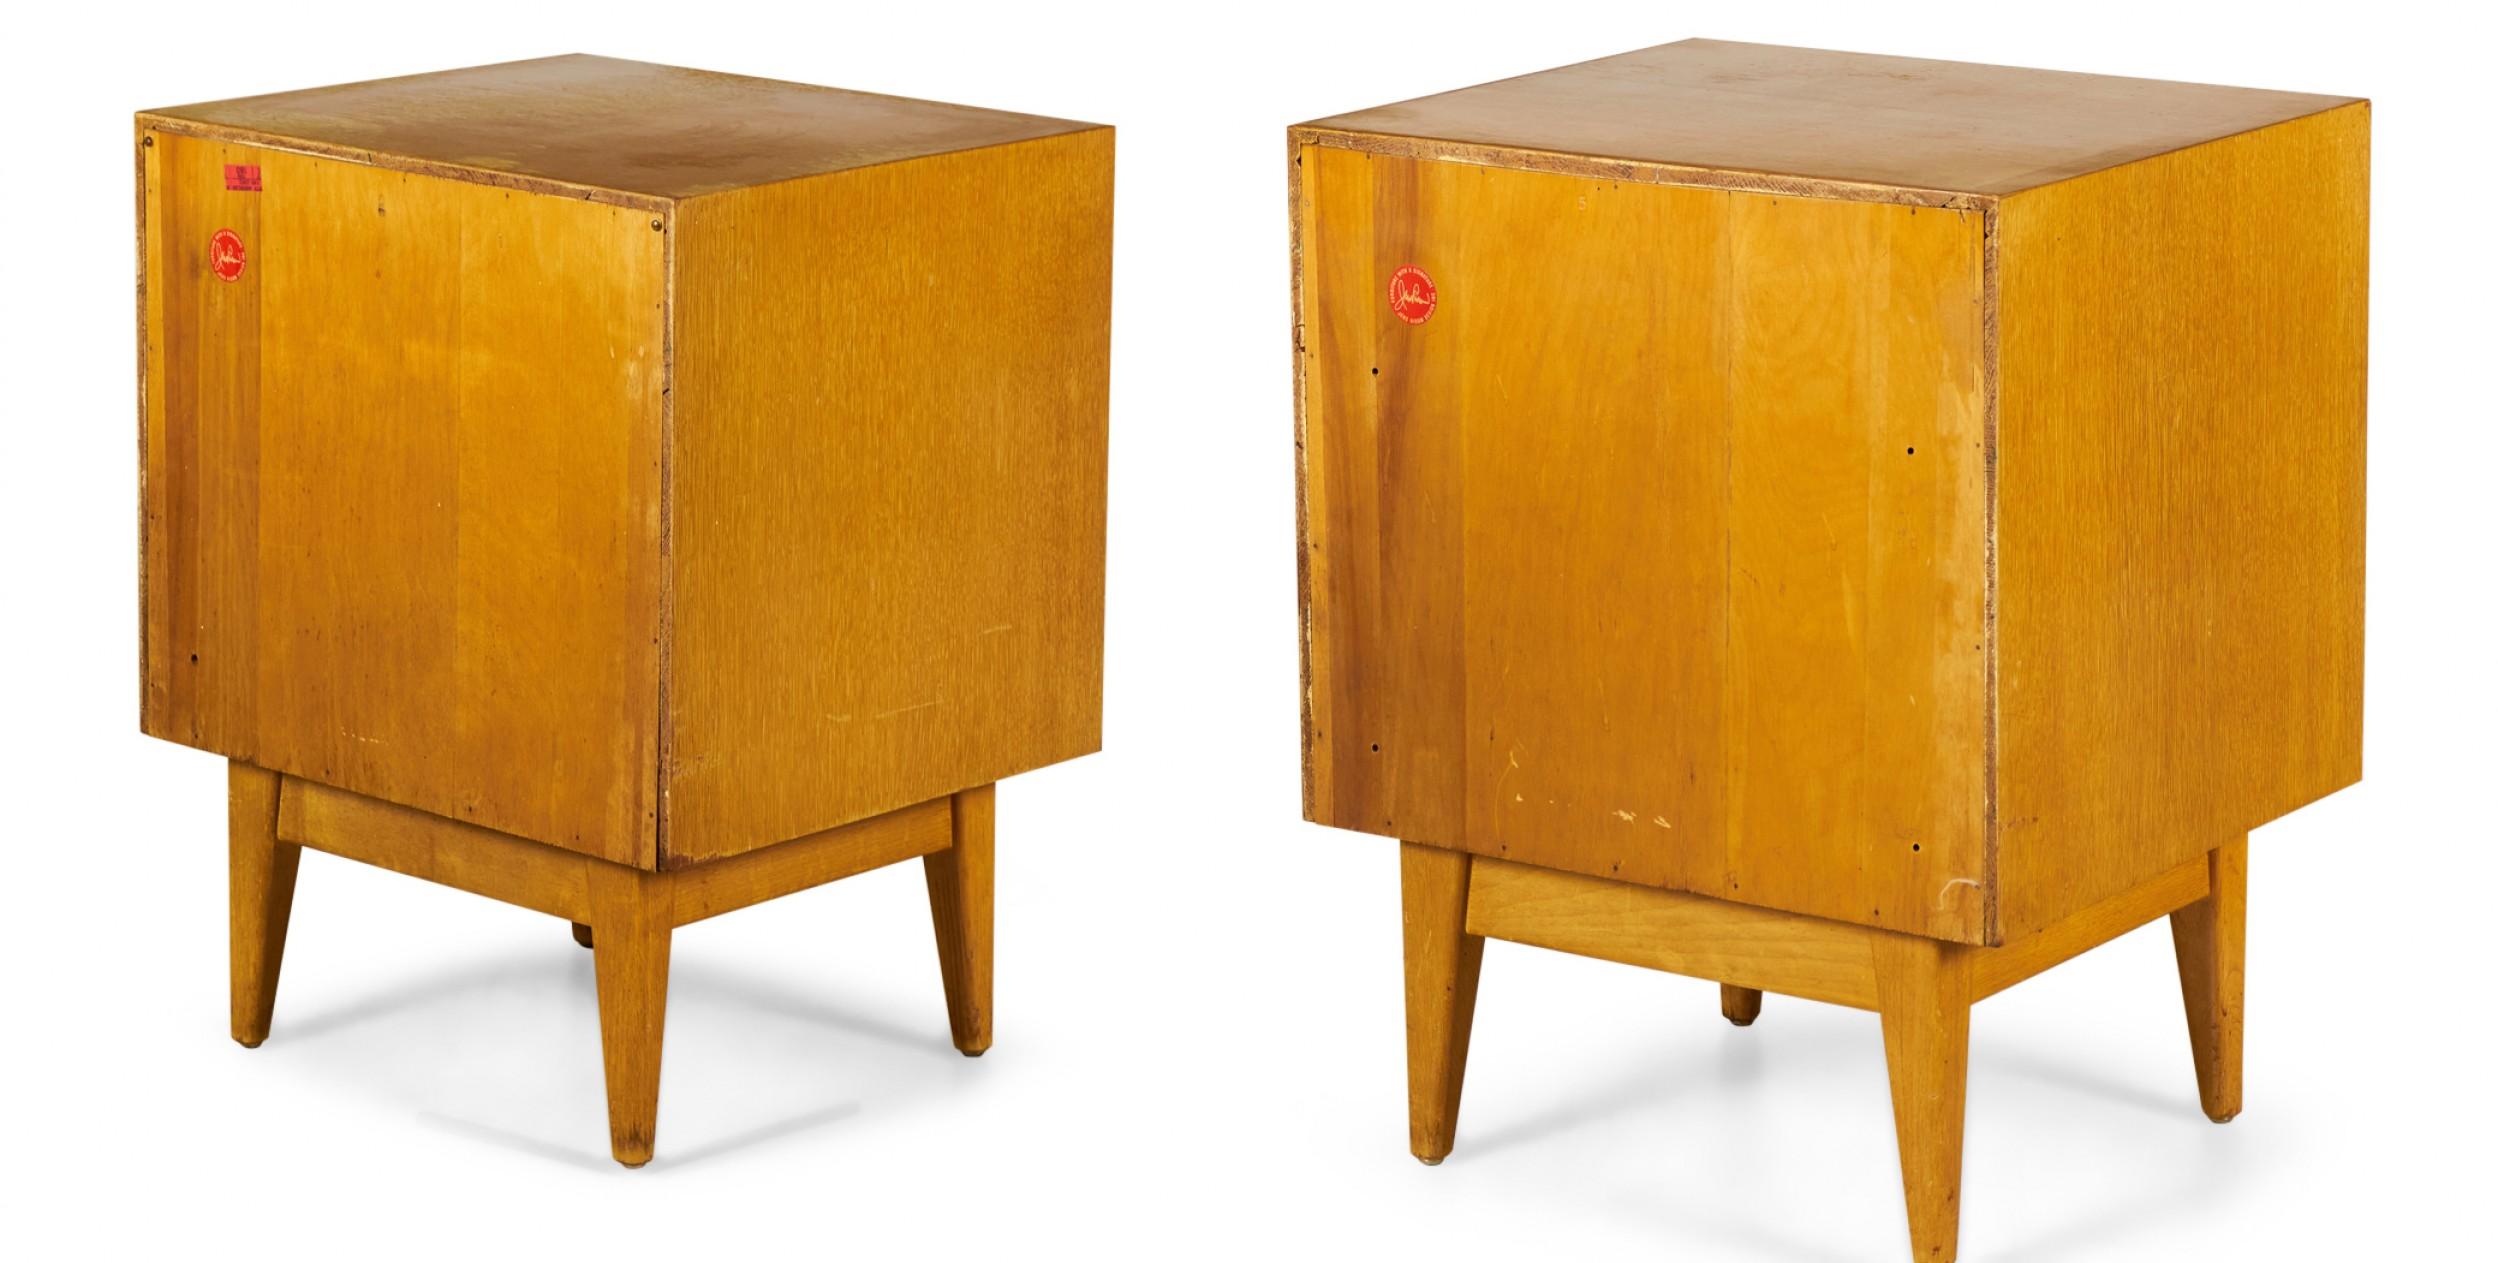 Pair of Jens Risom Danish Mid-Century Blond Oak Bedside Table / Commodes For Sale 1